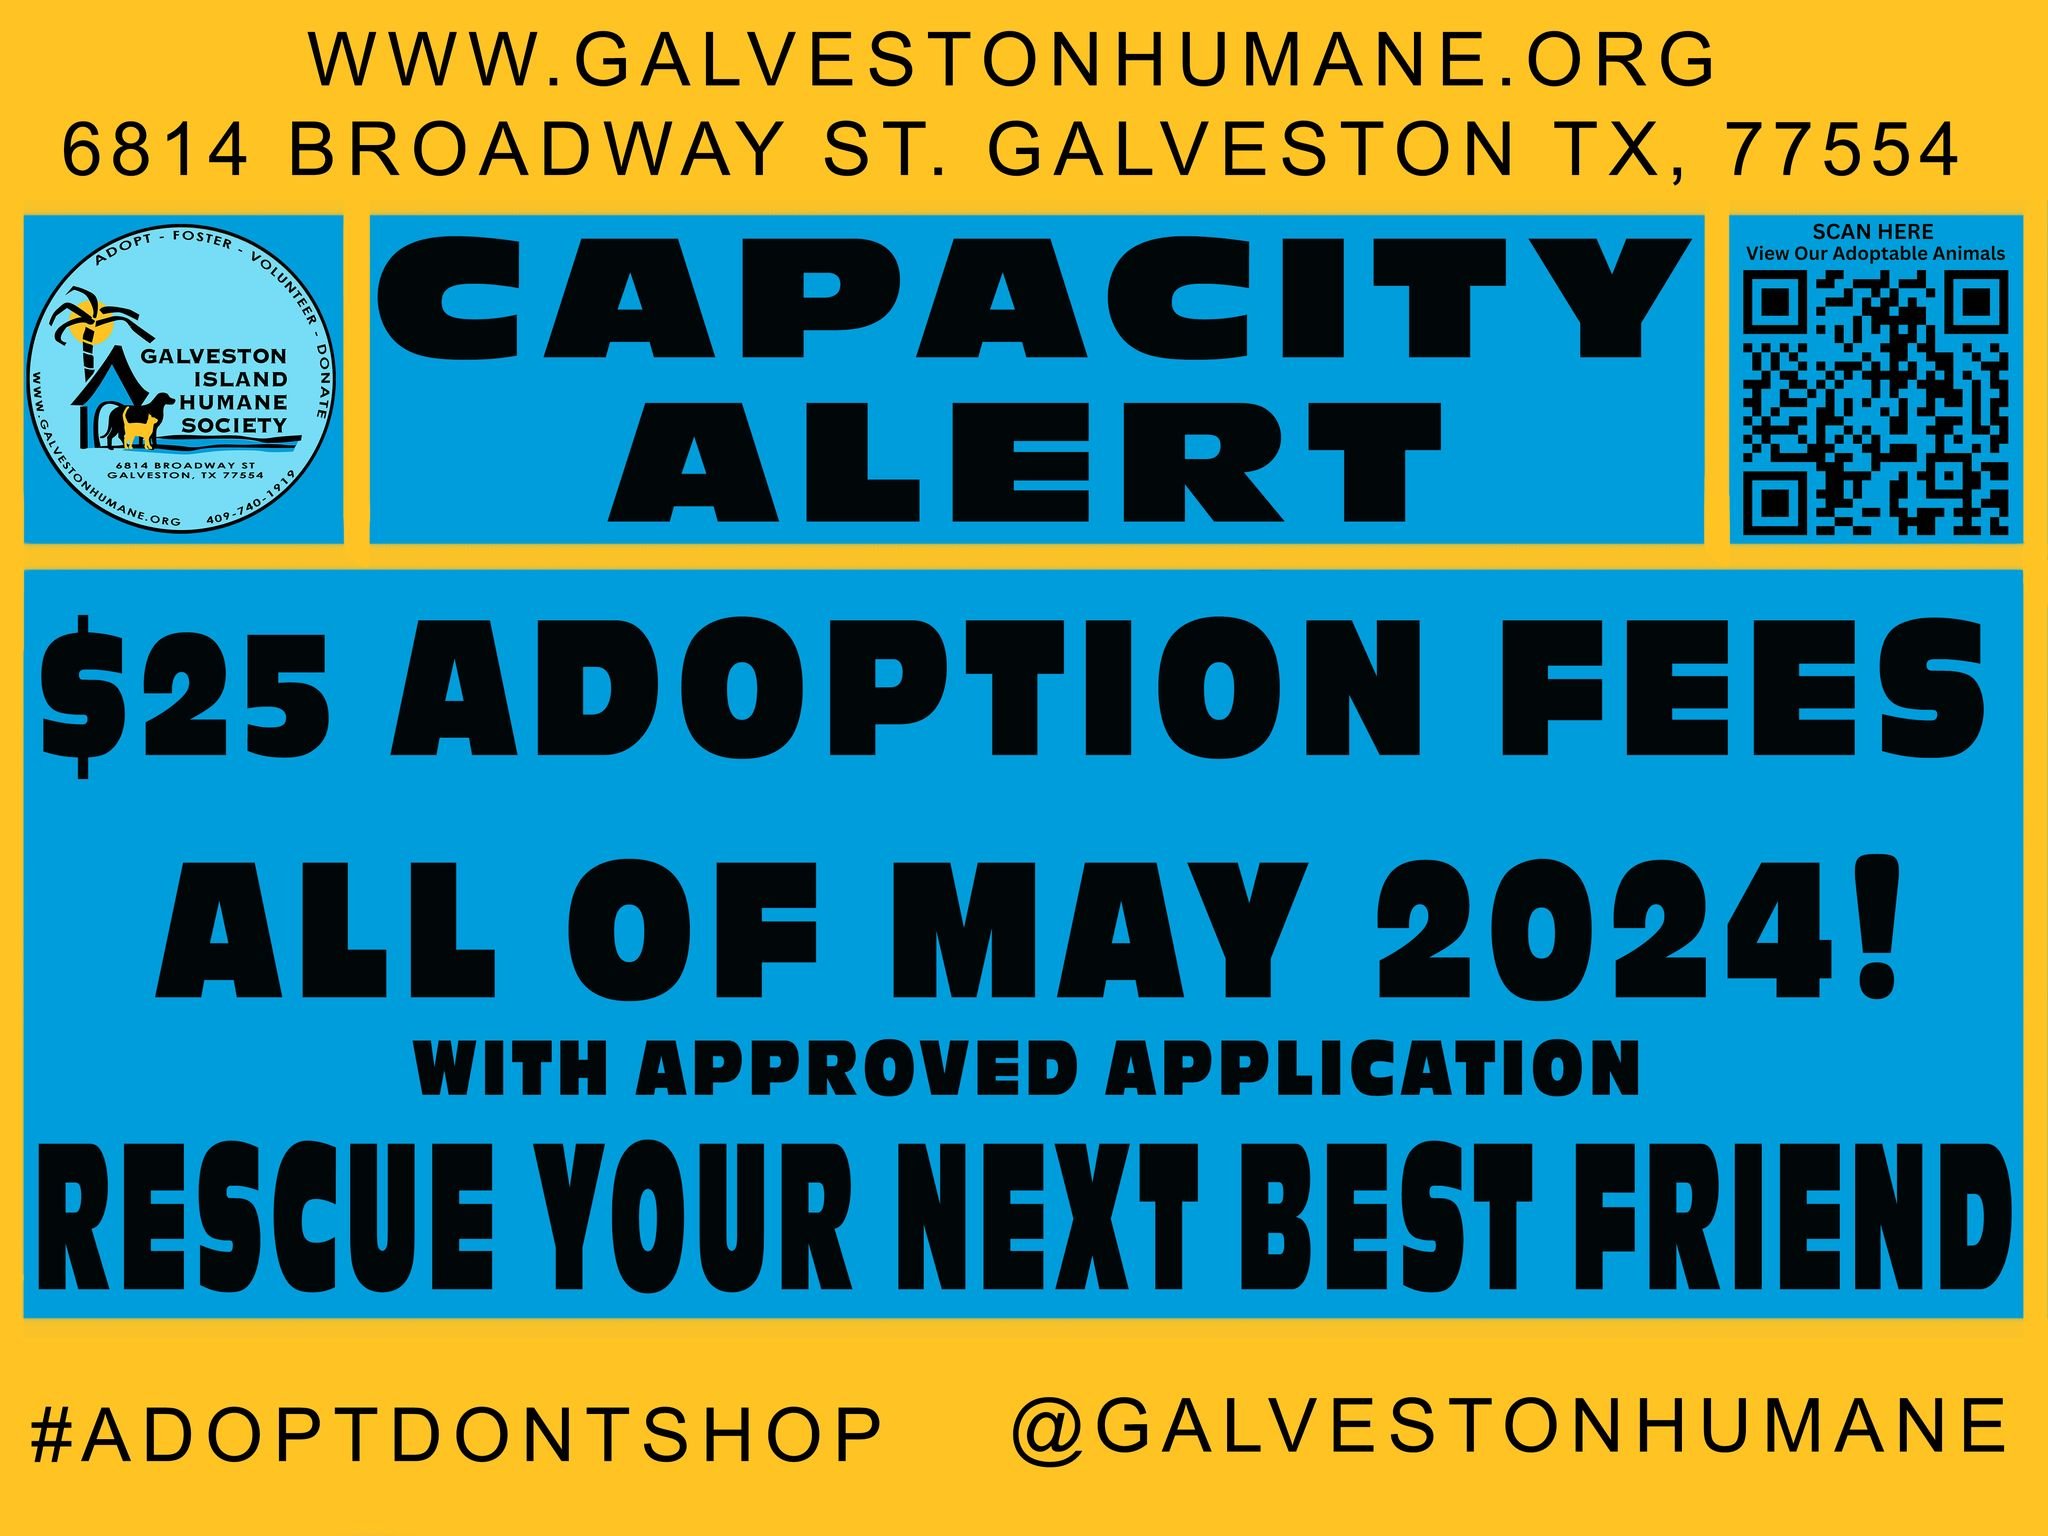 We sure did enjoy those few days last week with an empty front hall. We have had many intakes and we again have animals housed in the front hallway. 
For the remainder of May 2024 all adoption fees have been reduced to $25. 
Please check out our new 